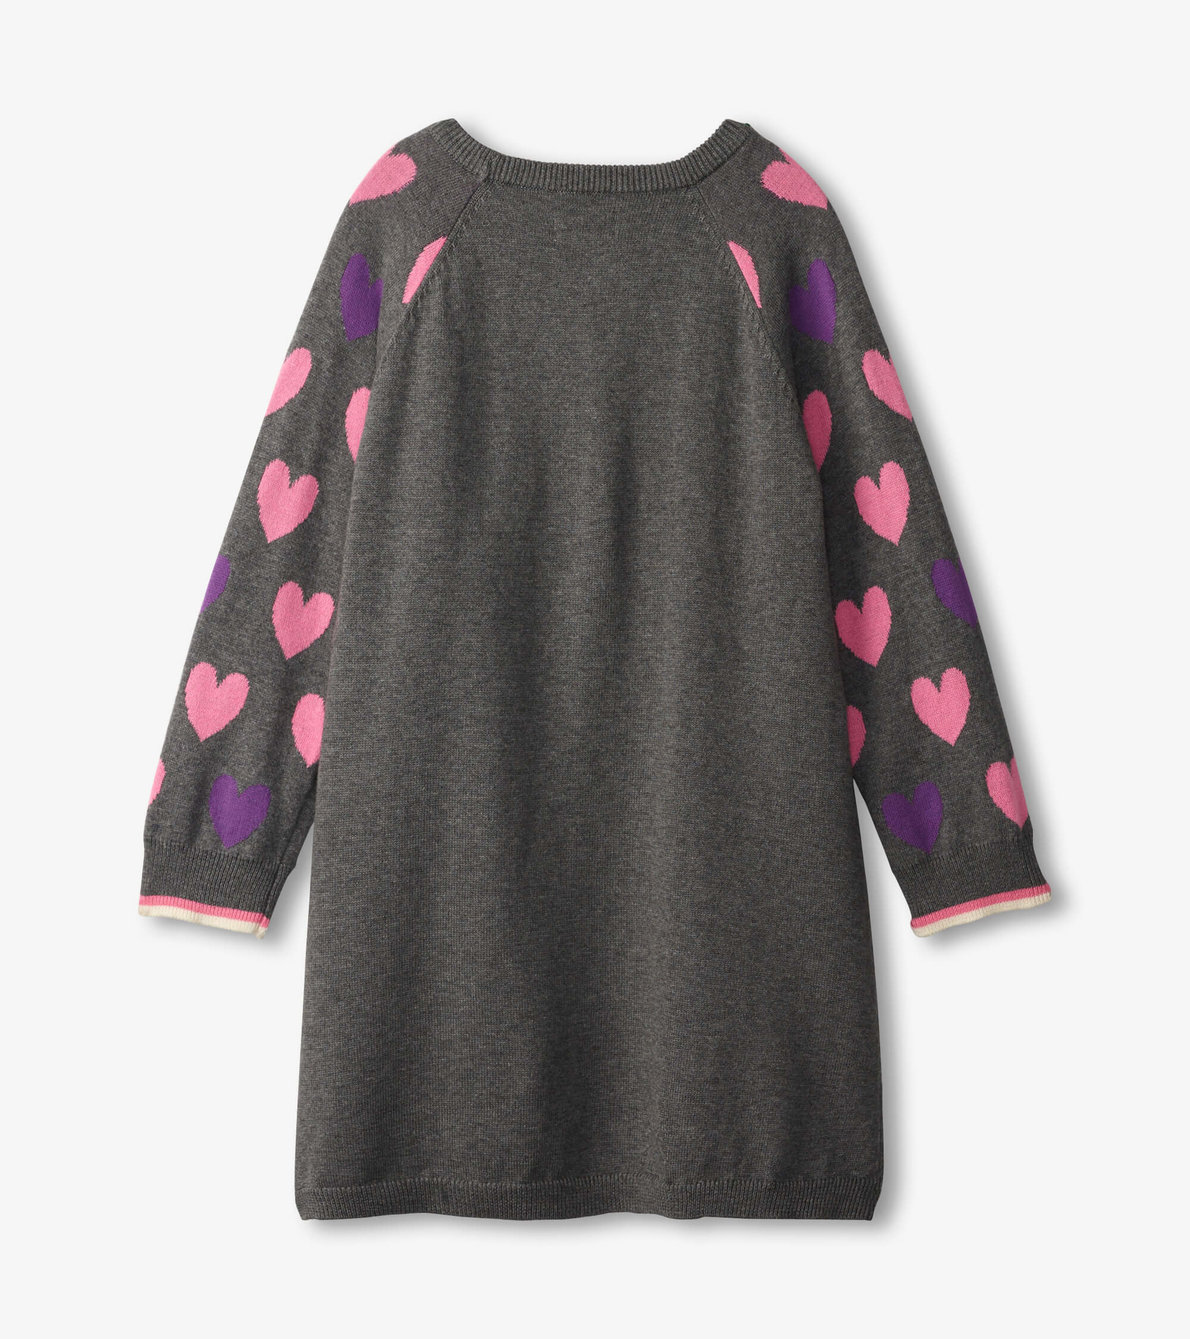 View larger image of Bunny Hearts Sweater Dress